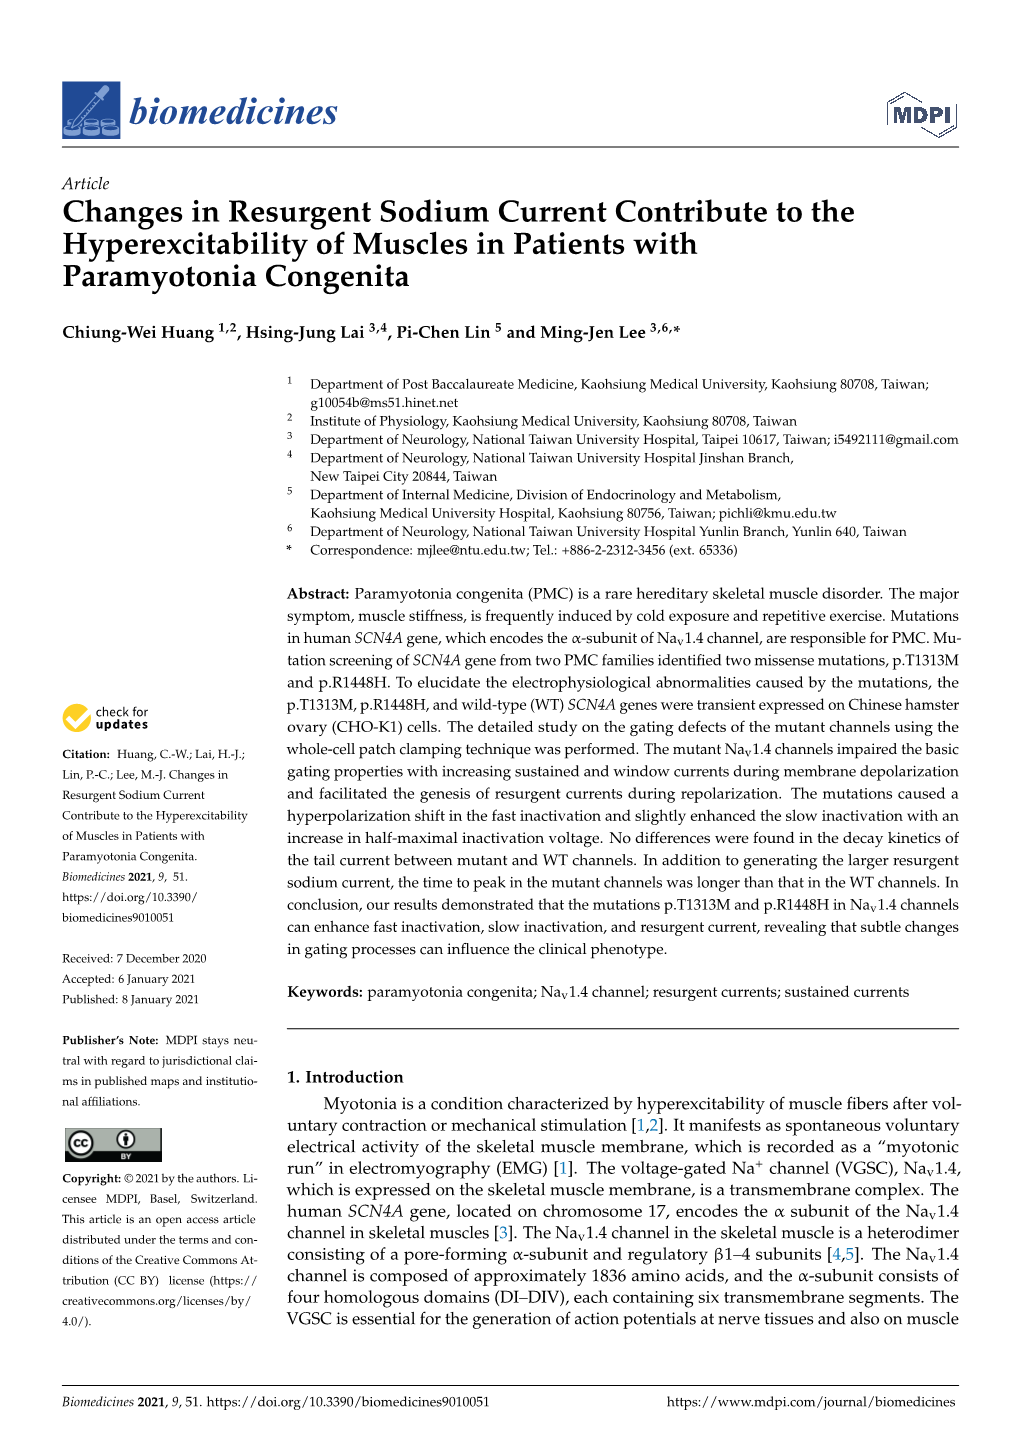 Changes in Resurgent Sodium Current Contribute to the Hyperexcitability of Muscles in Patients with Paramyotonia Congenita